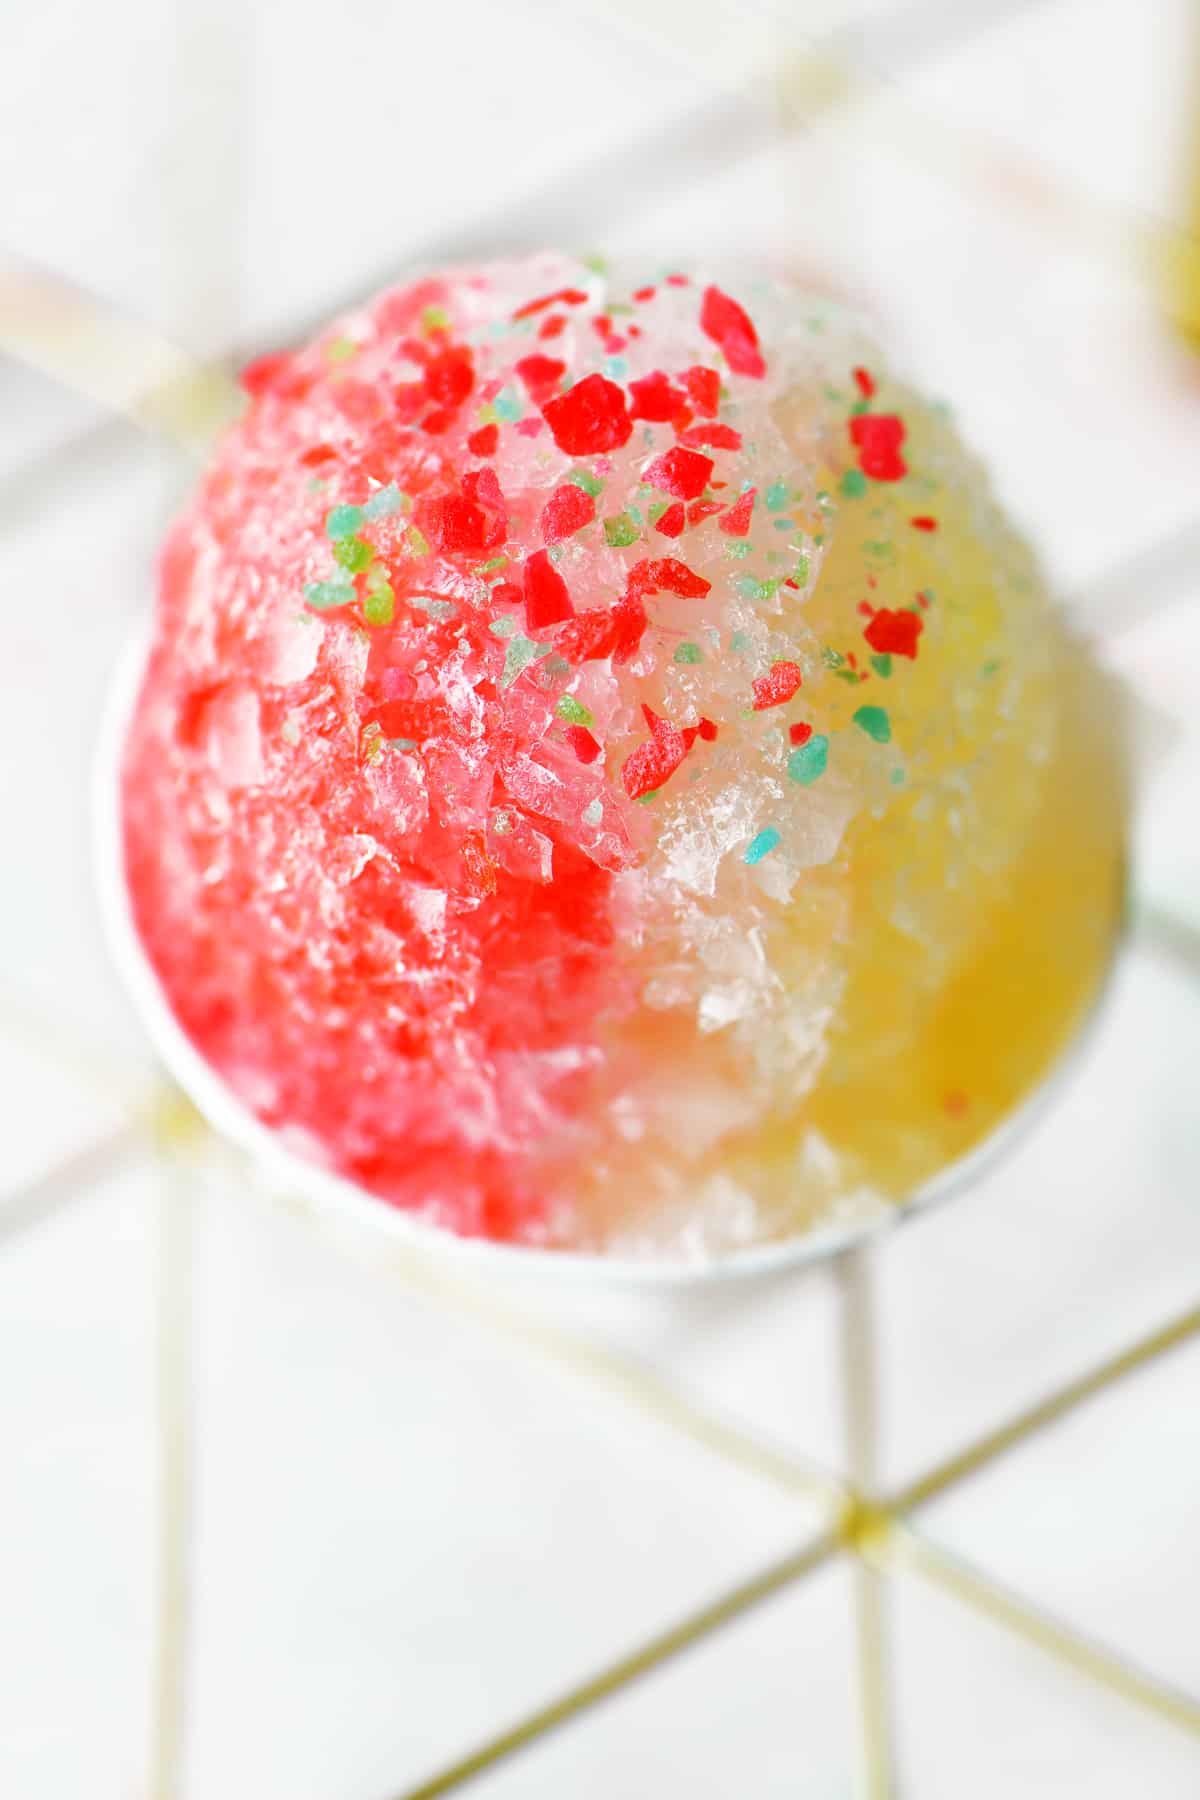 a red, white and yellow snow cone with Pop-Rocks candy on top